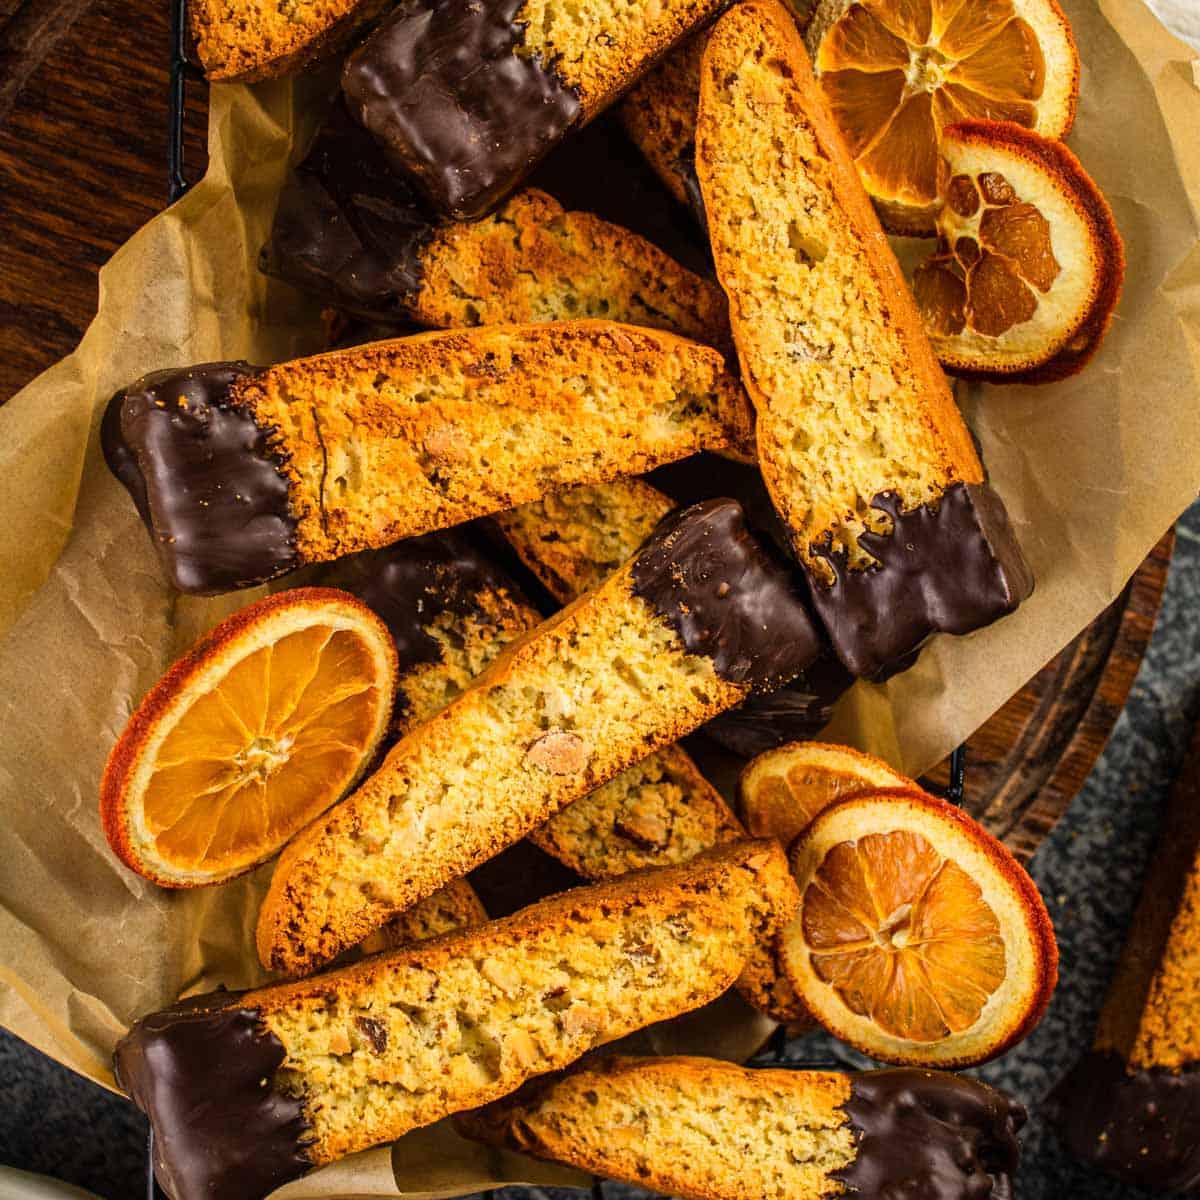 biscotti with chocolate dipped ends in a basket with dried orange slices